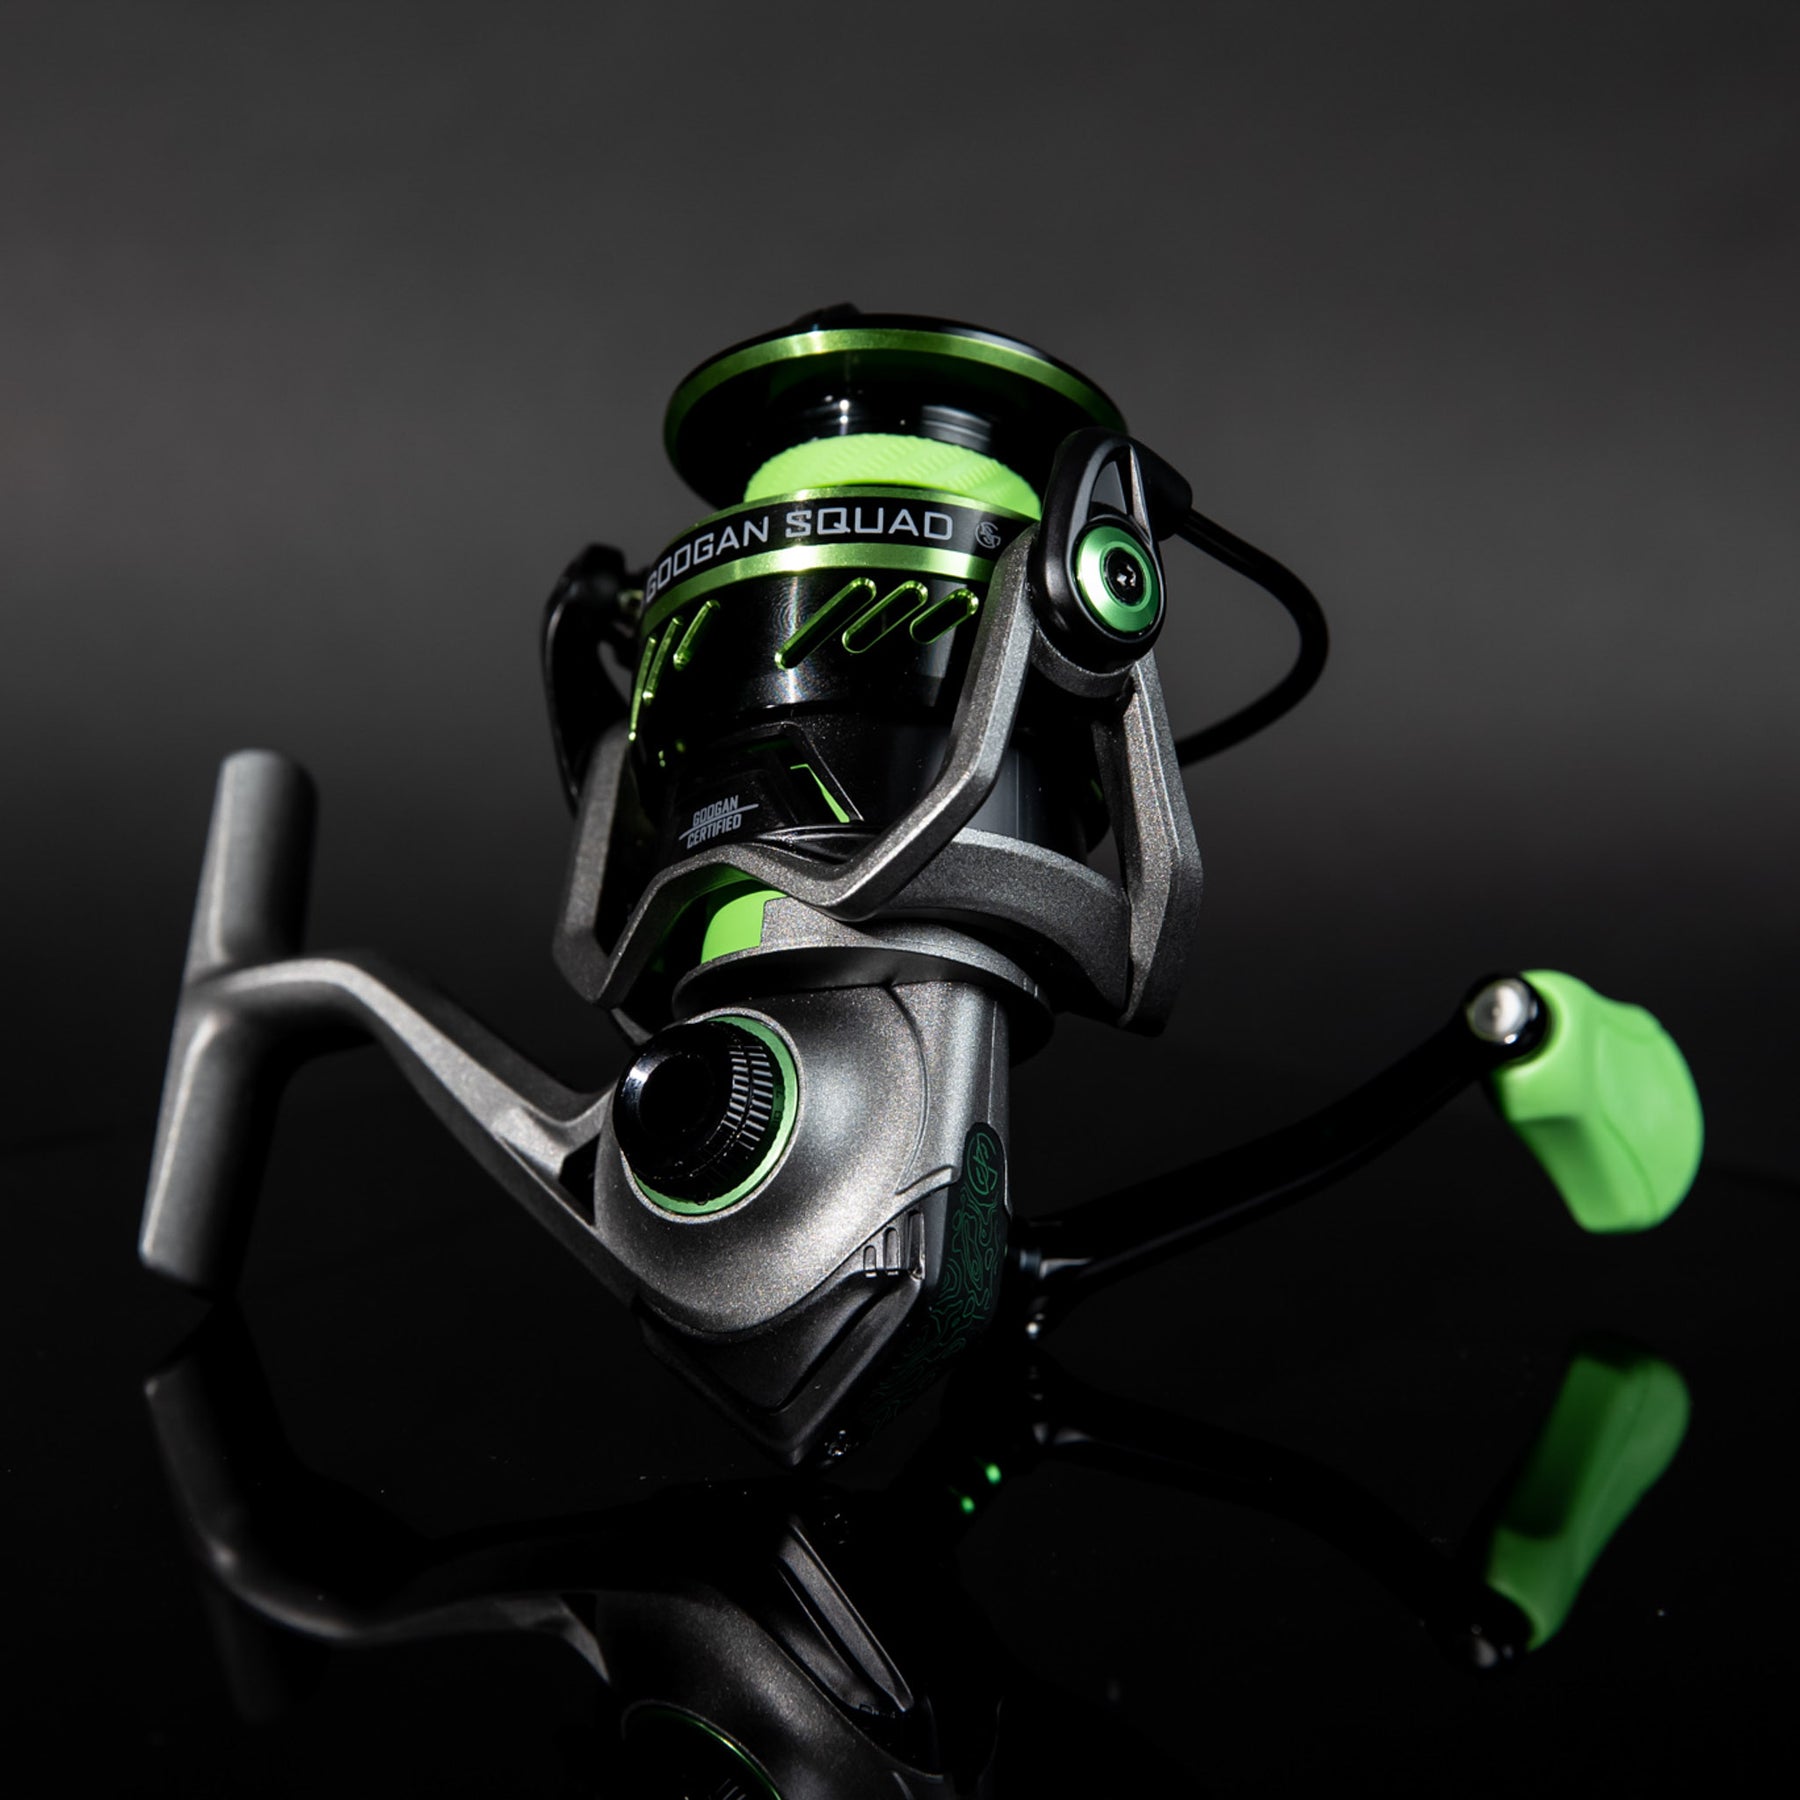 Catch Co Googan Squad Green Series Spinning Reel | Spinning Fishing Reel |  Bass Fishing | Panfish Fishing | Finesse Fishing